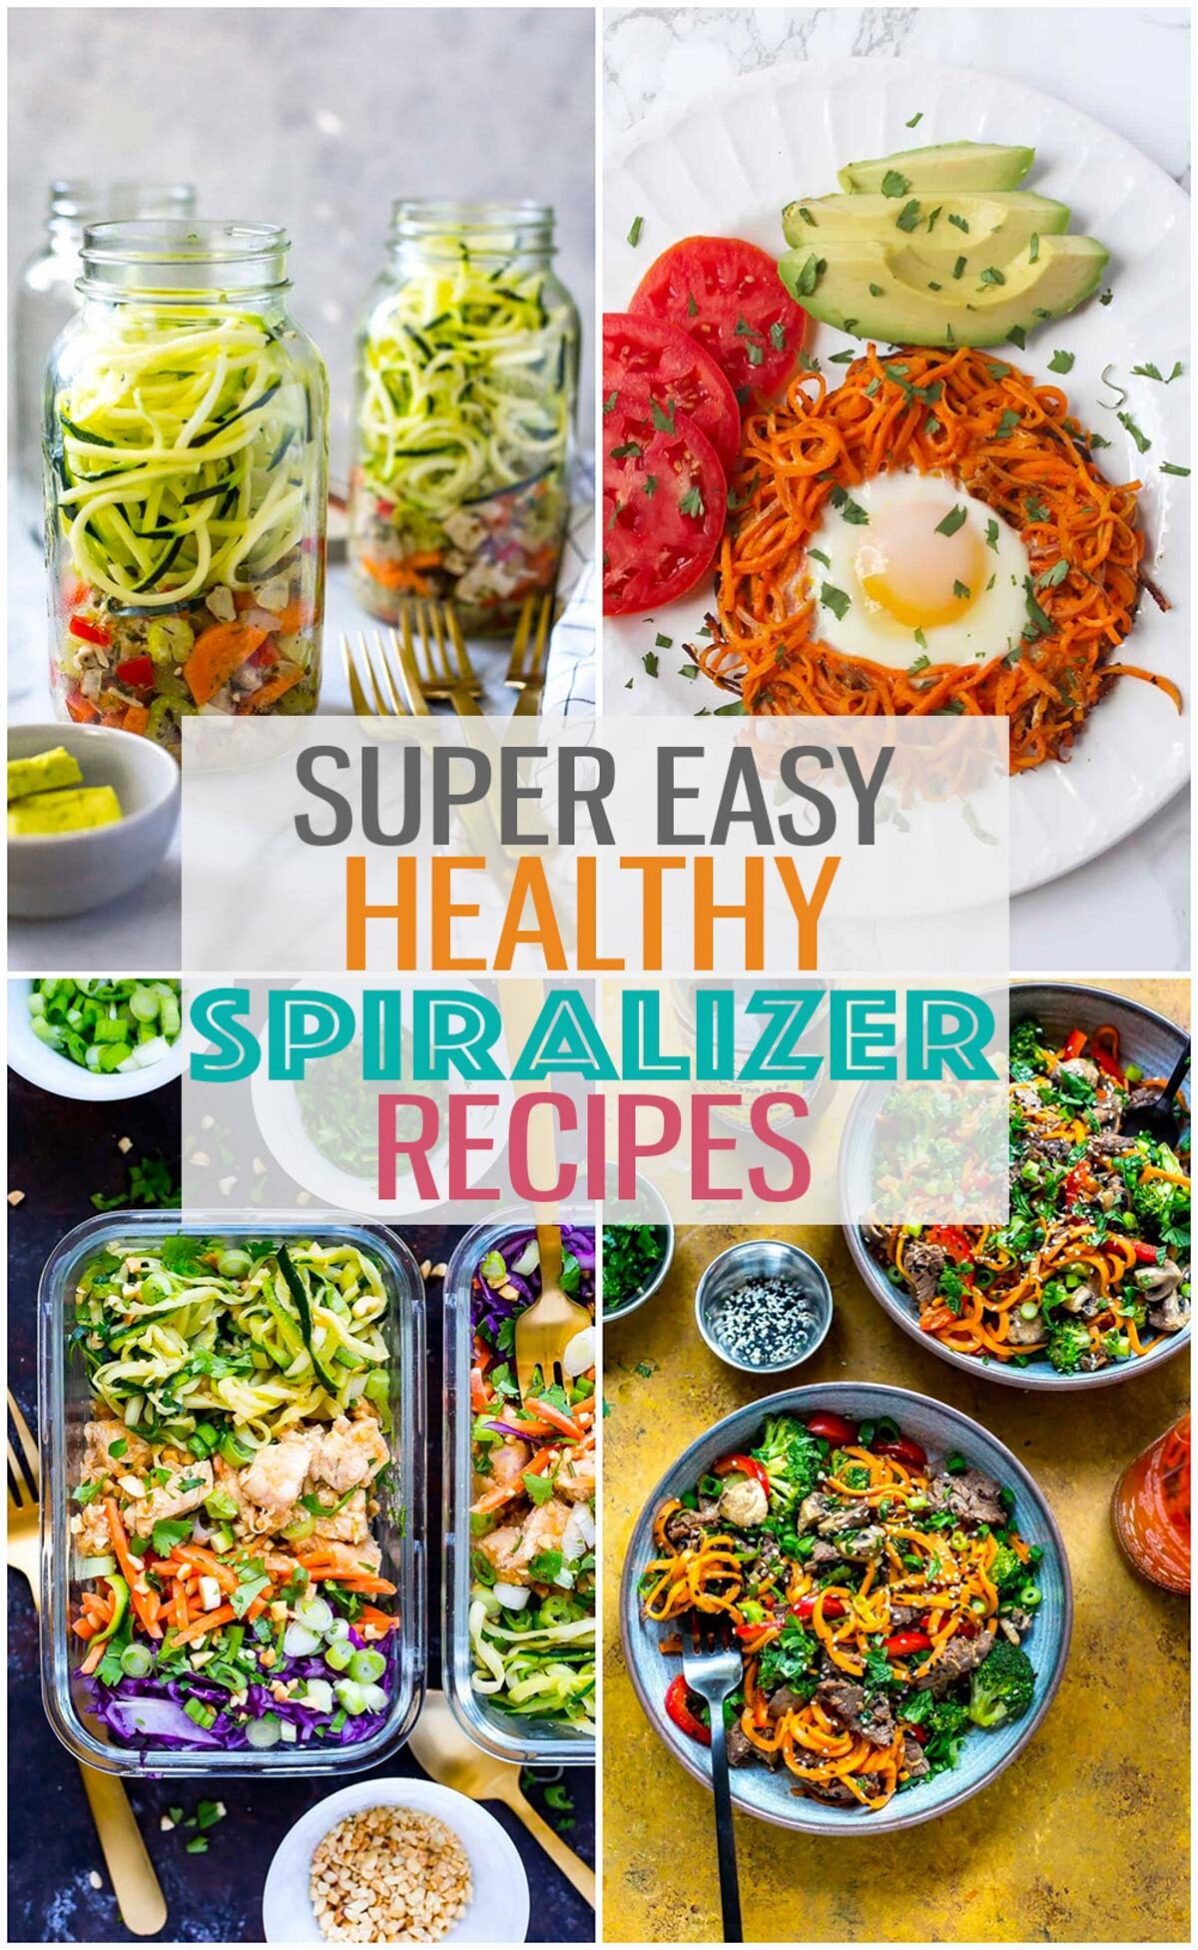 A collage of 4 different spiralizer recipes with the text "Super Easy Healthy Spiralizer Recipes" layered over top.